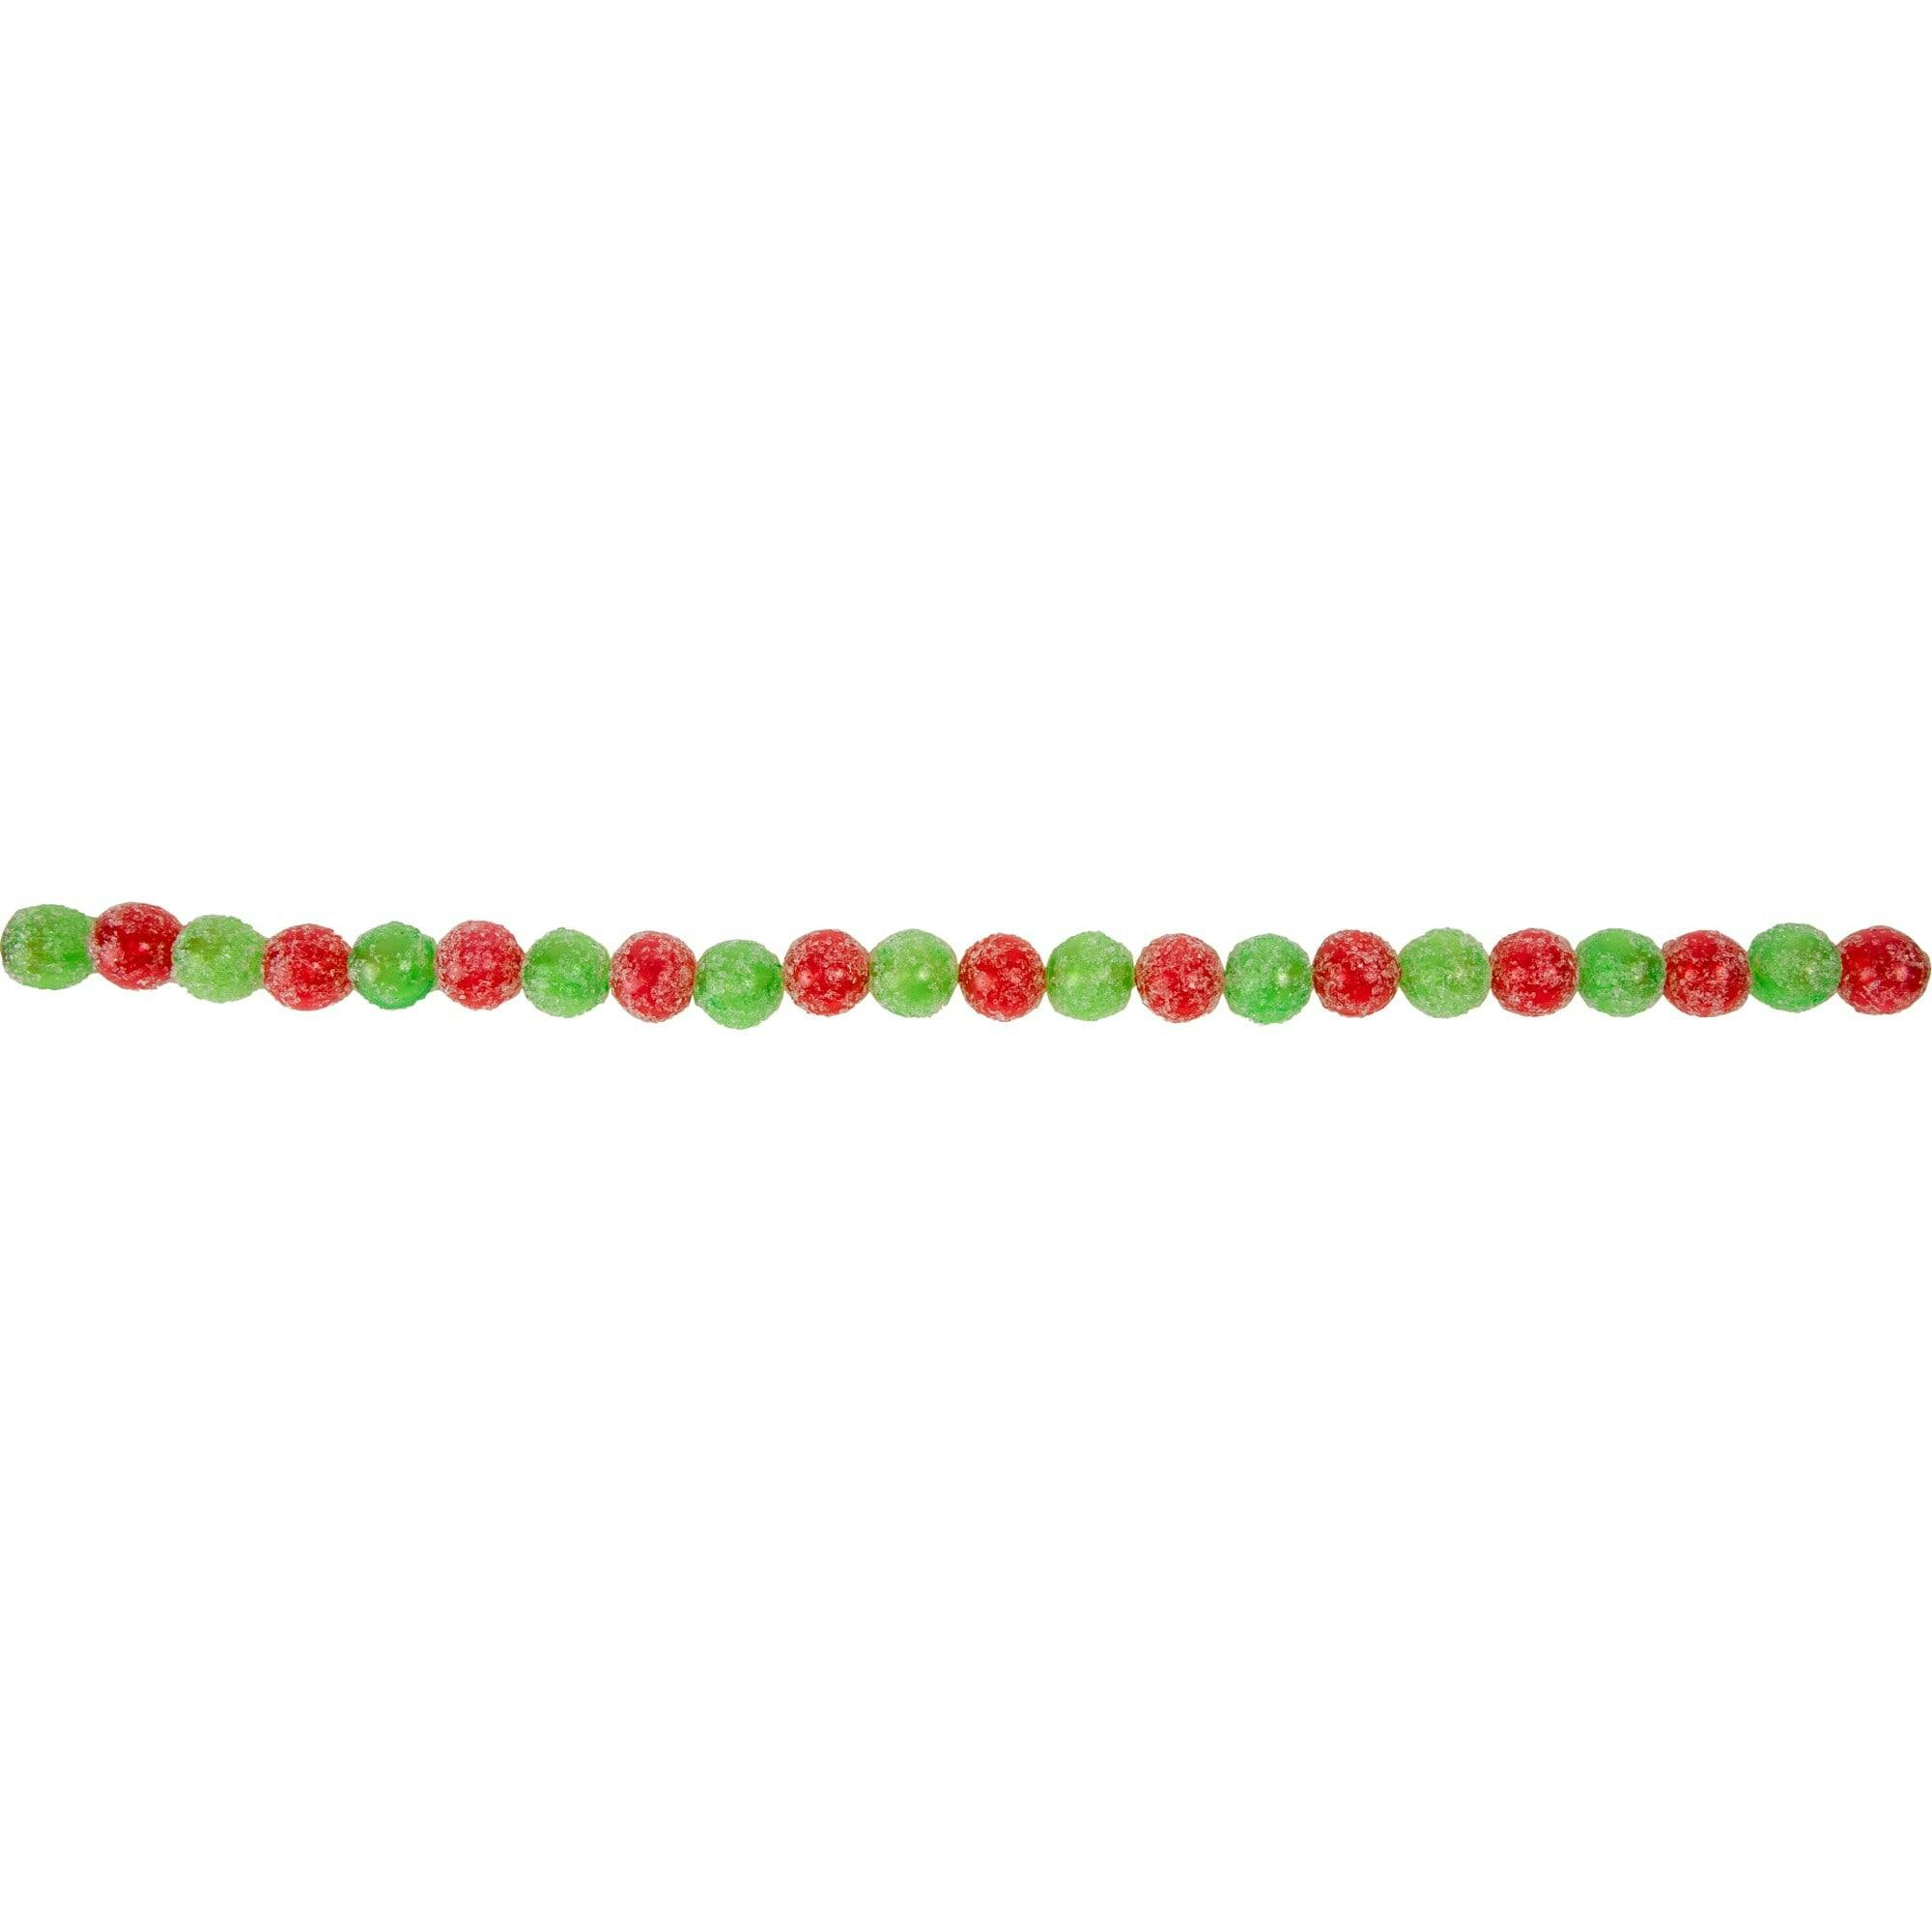 Frosted Glitter Pine Garland with Red & Green Candy Drops - 6ft